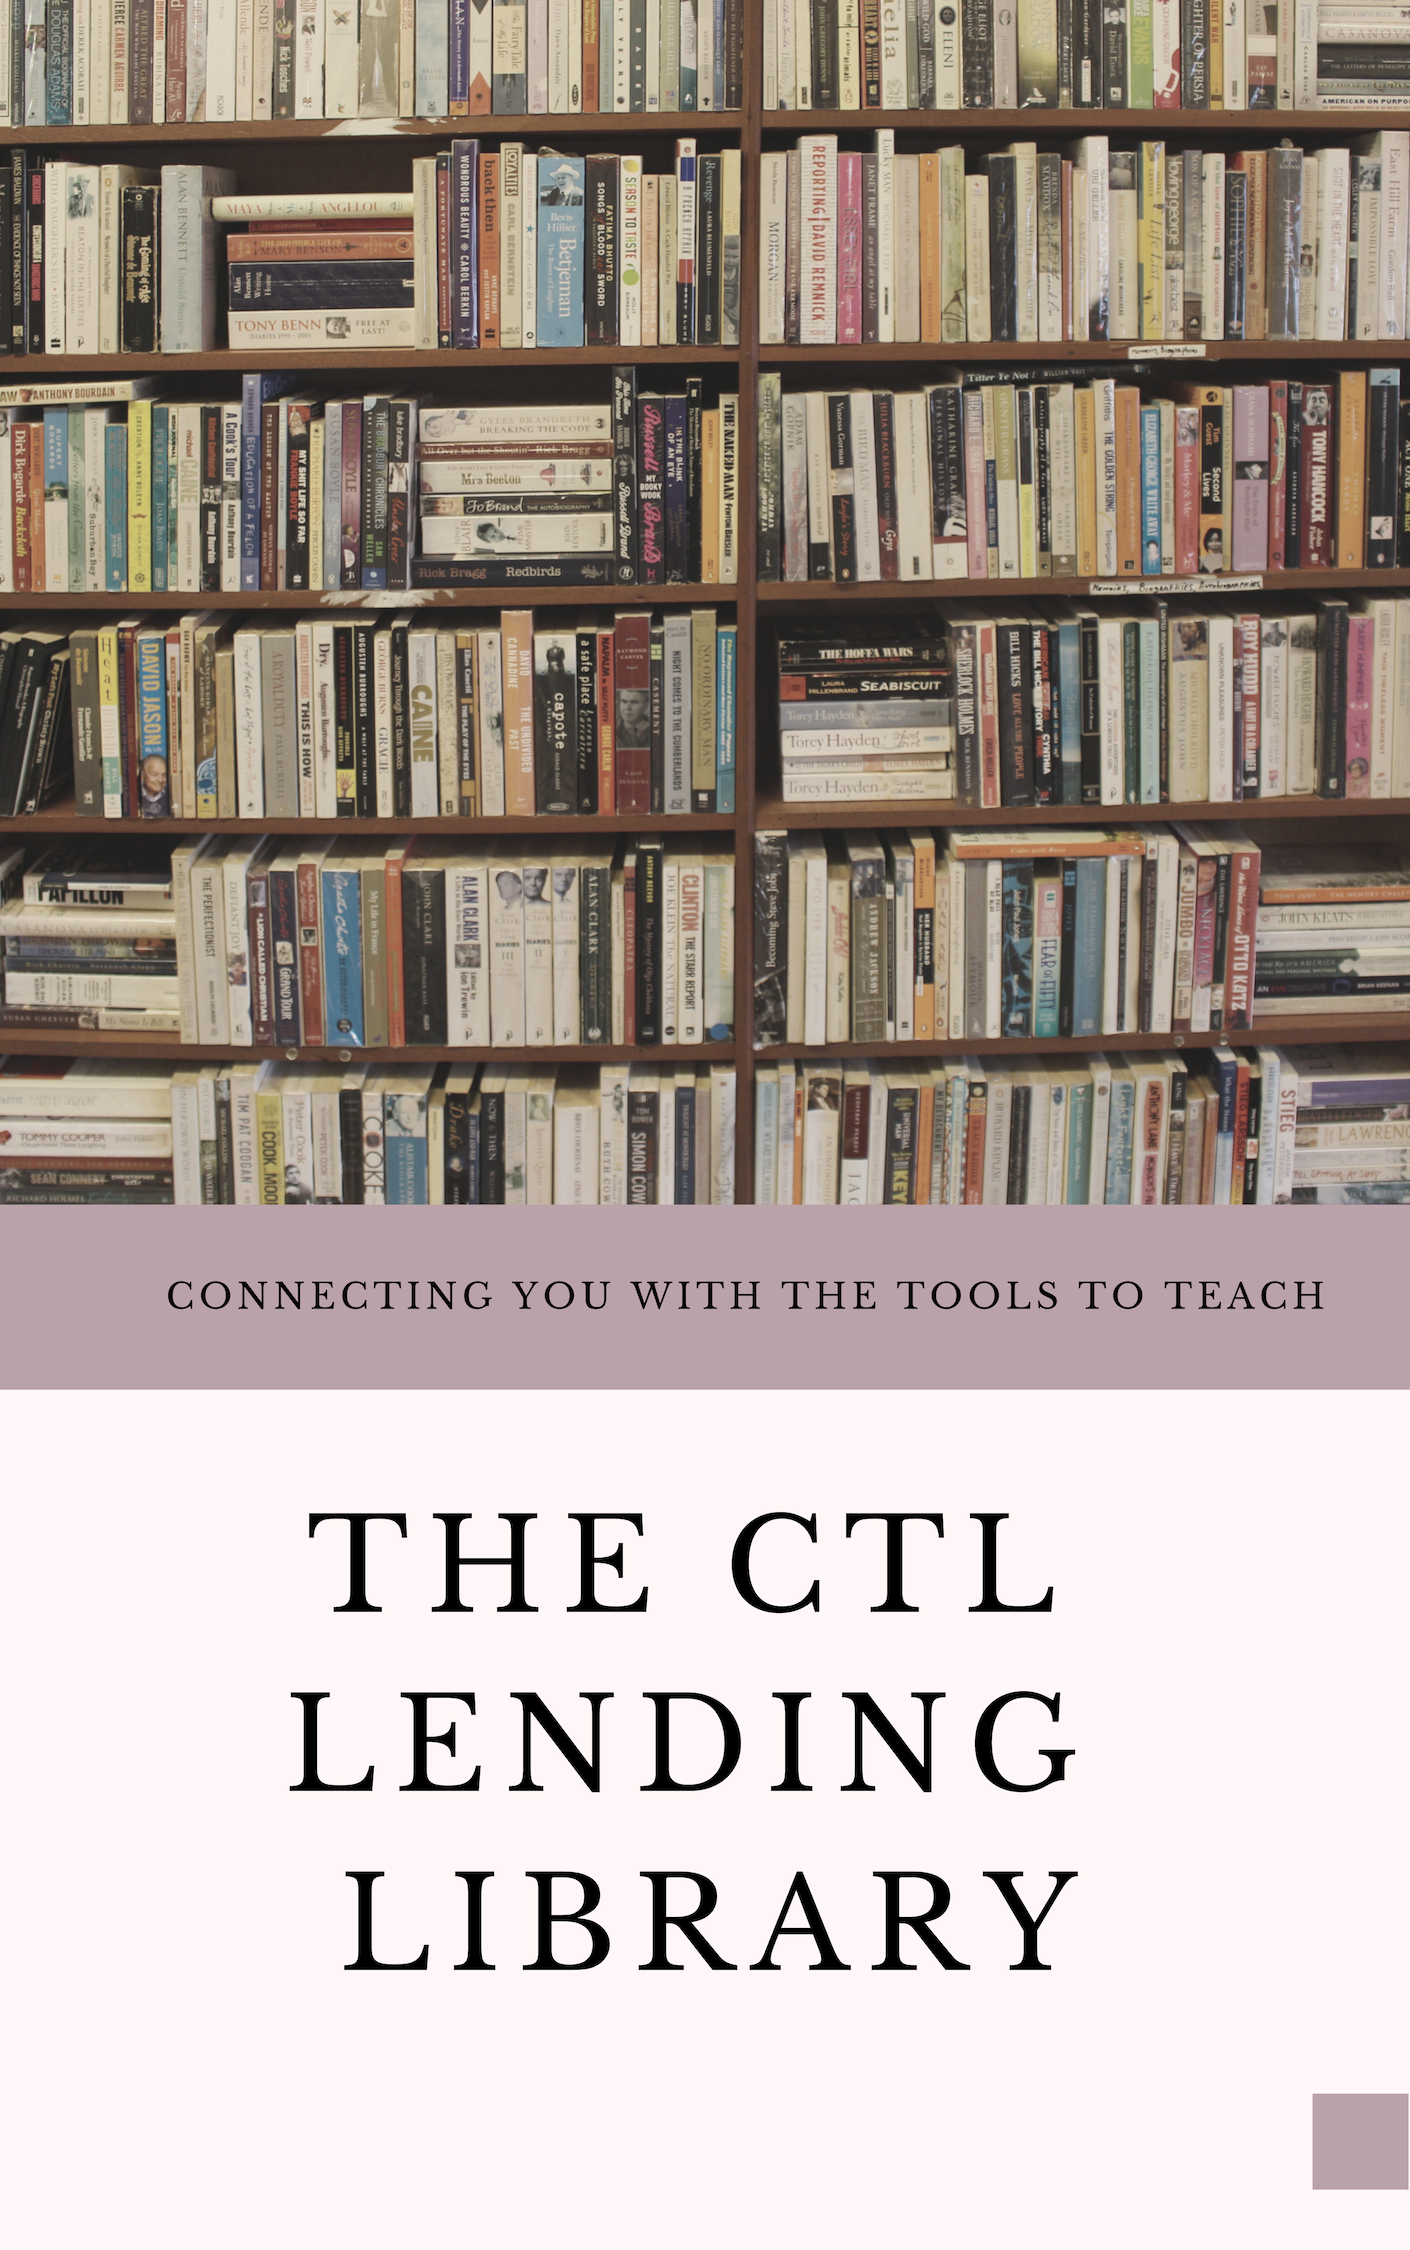 Mock book cover link to the UMPI CTL Lending Library book list